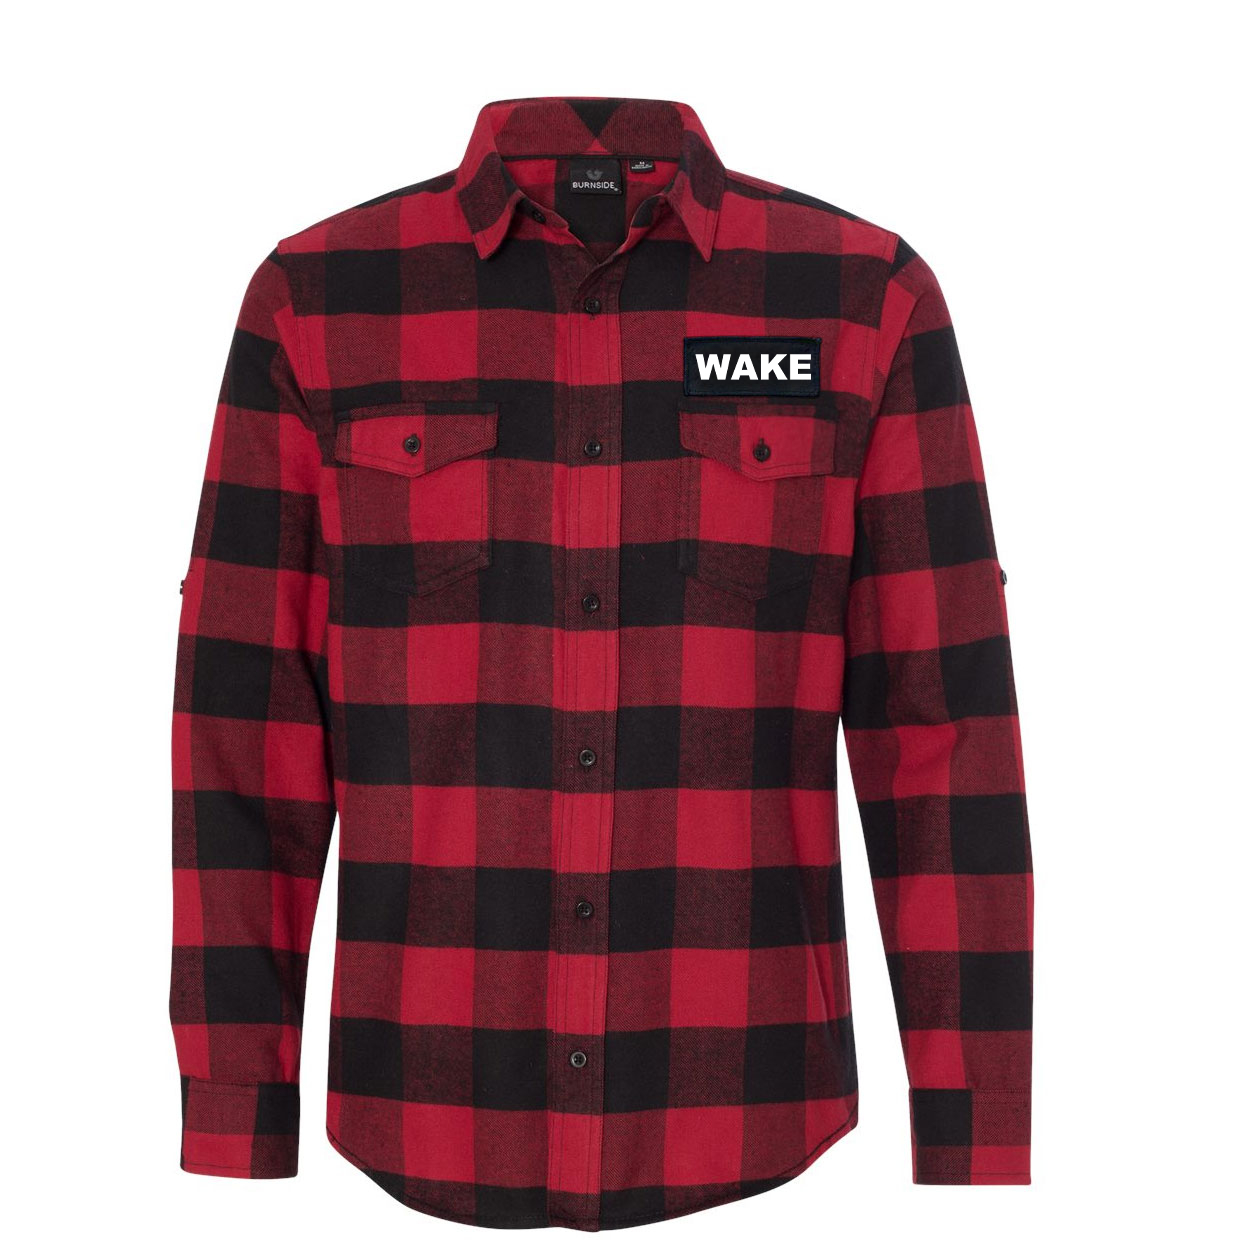 Wake Brand Logo Night Out Rectangle Woven Patch Flannel Shirt Long Sleeve Red/Black Buffalo